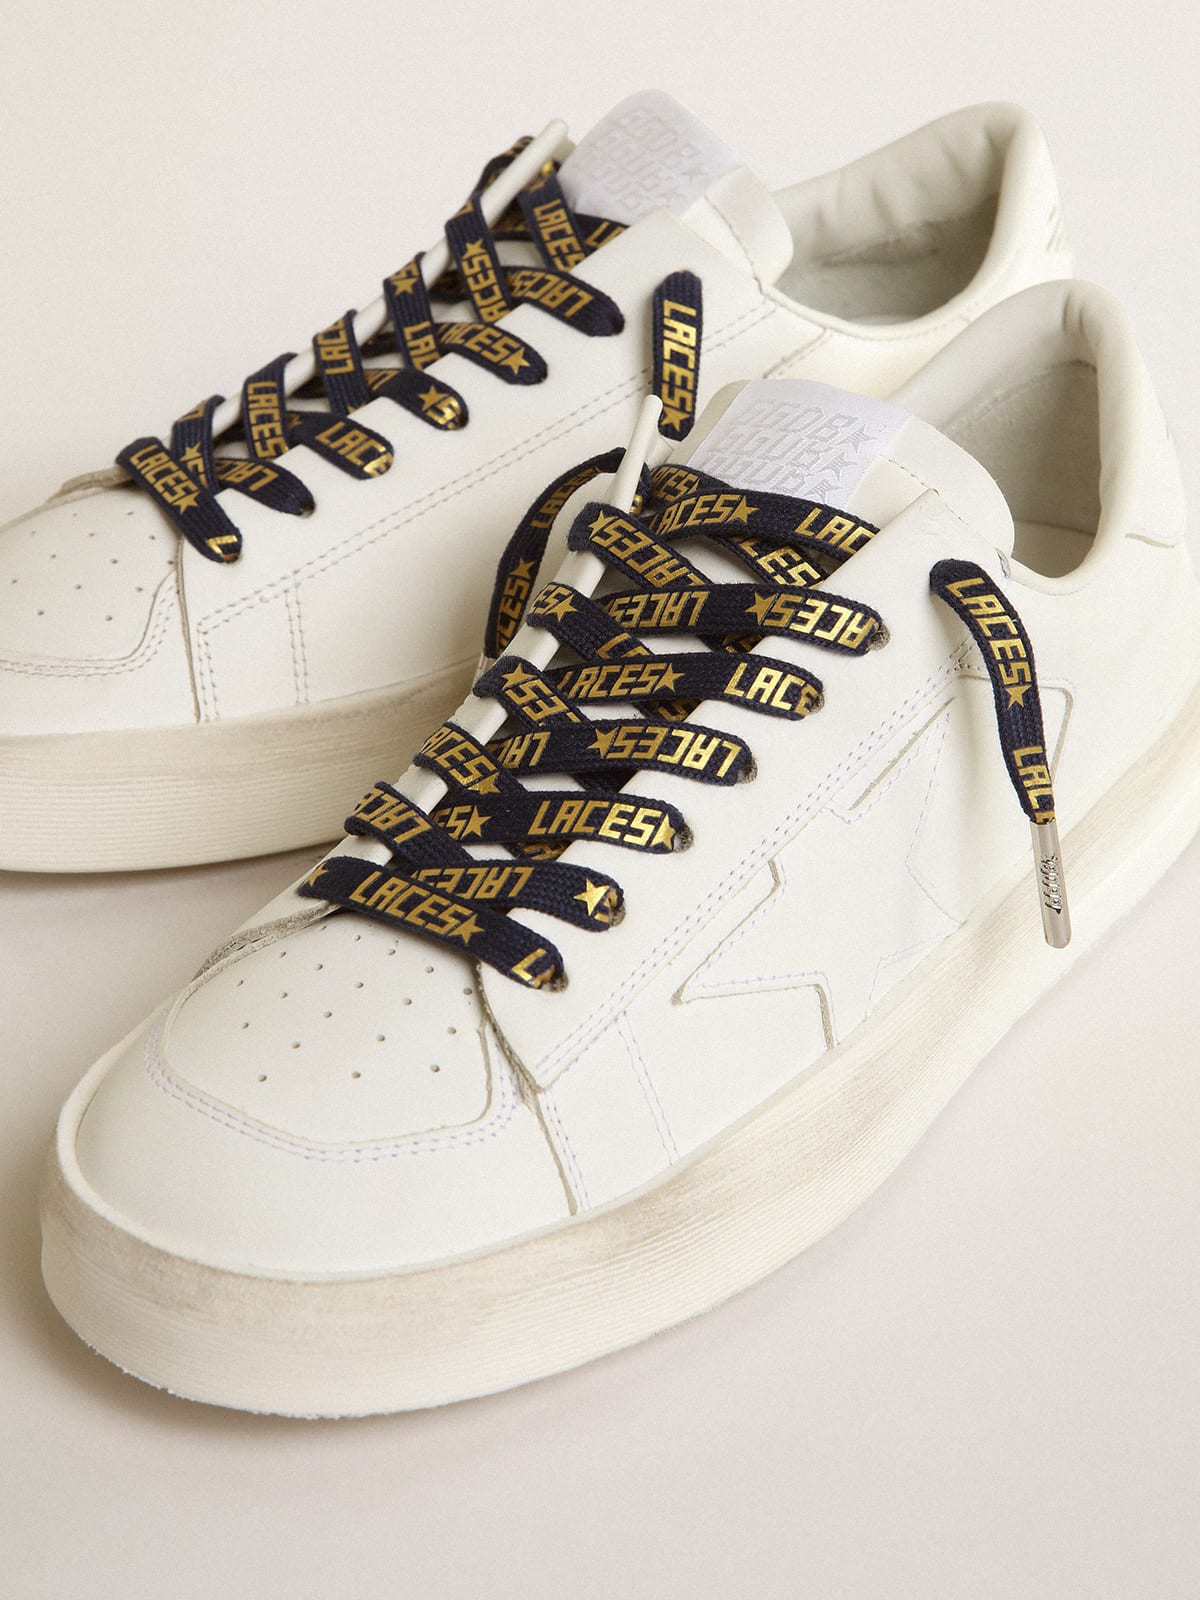 Golden Goose - Navy-blue laces with contrasting gold-colored ‘Laces’ lettering in 